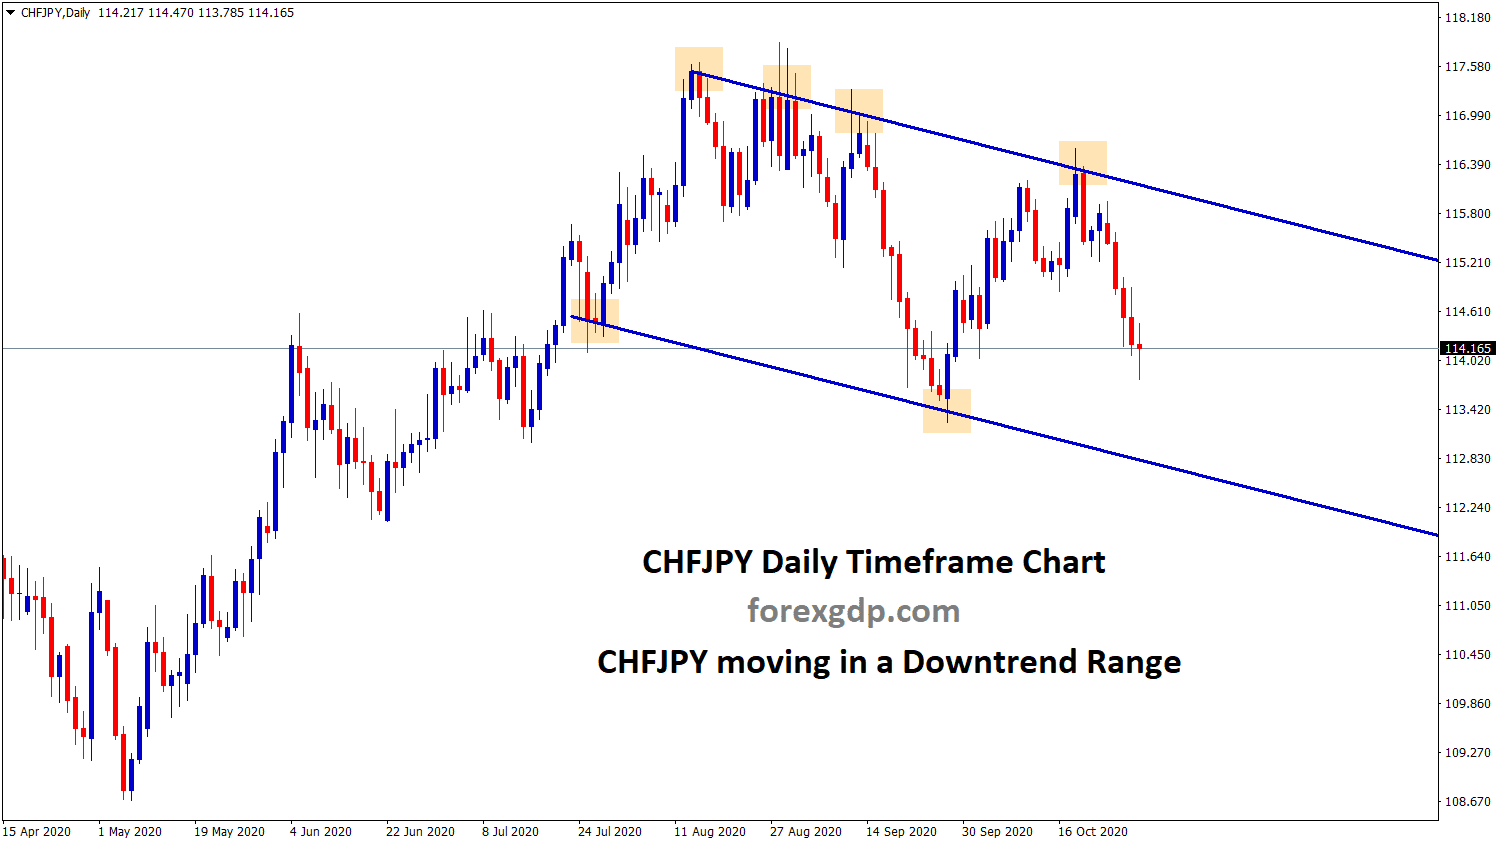 Chfjpy downtrend range in daily chart